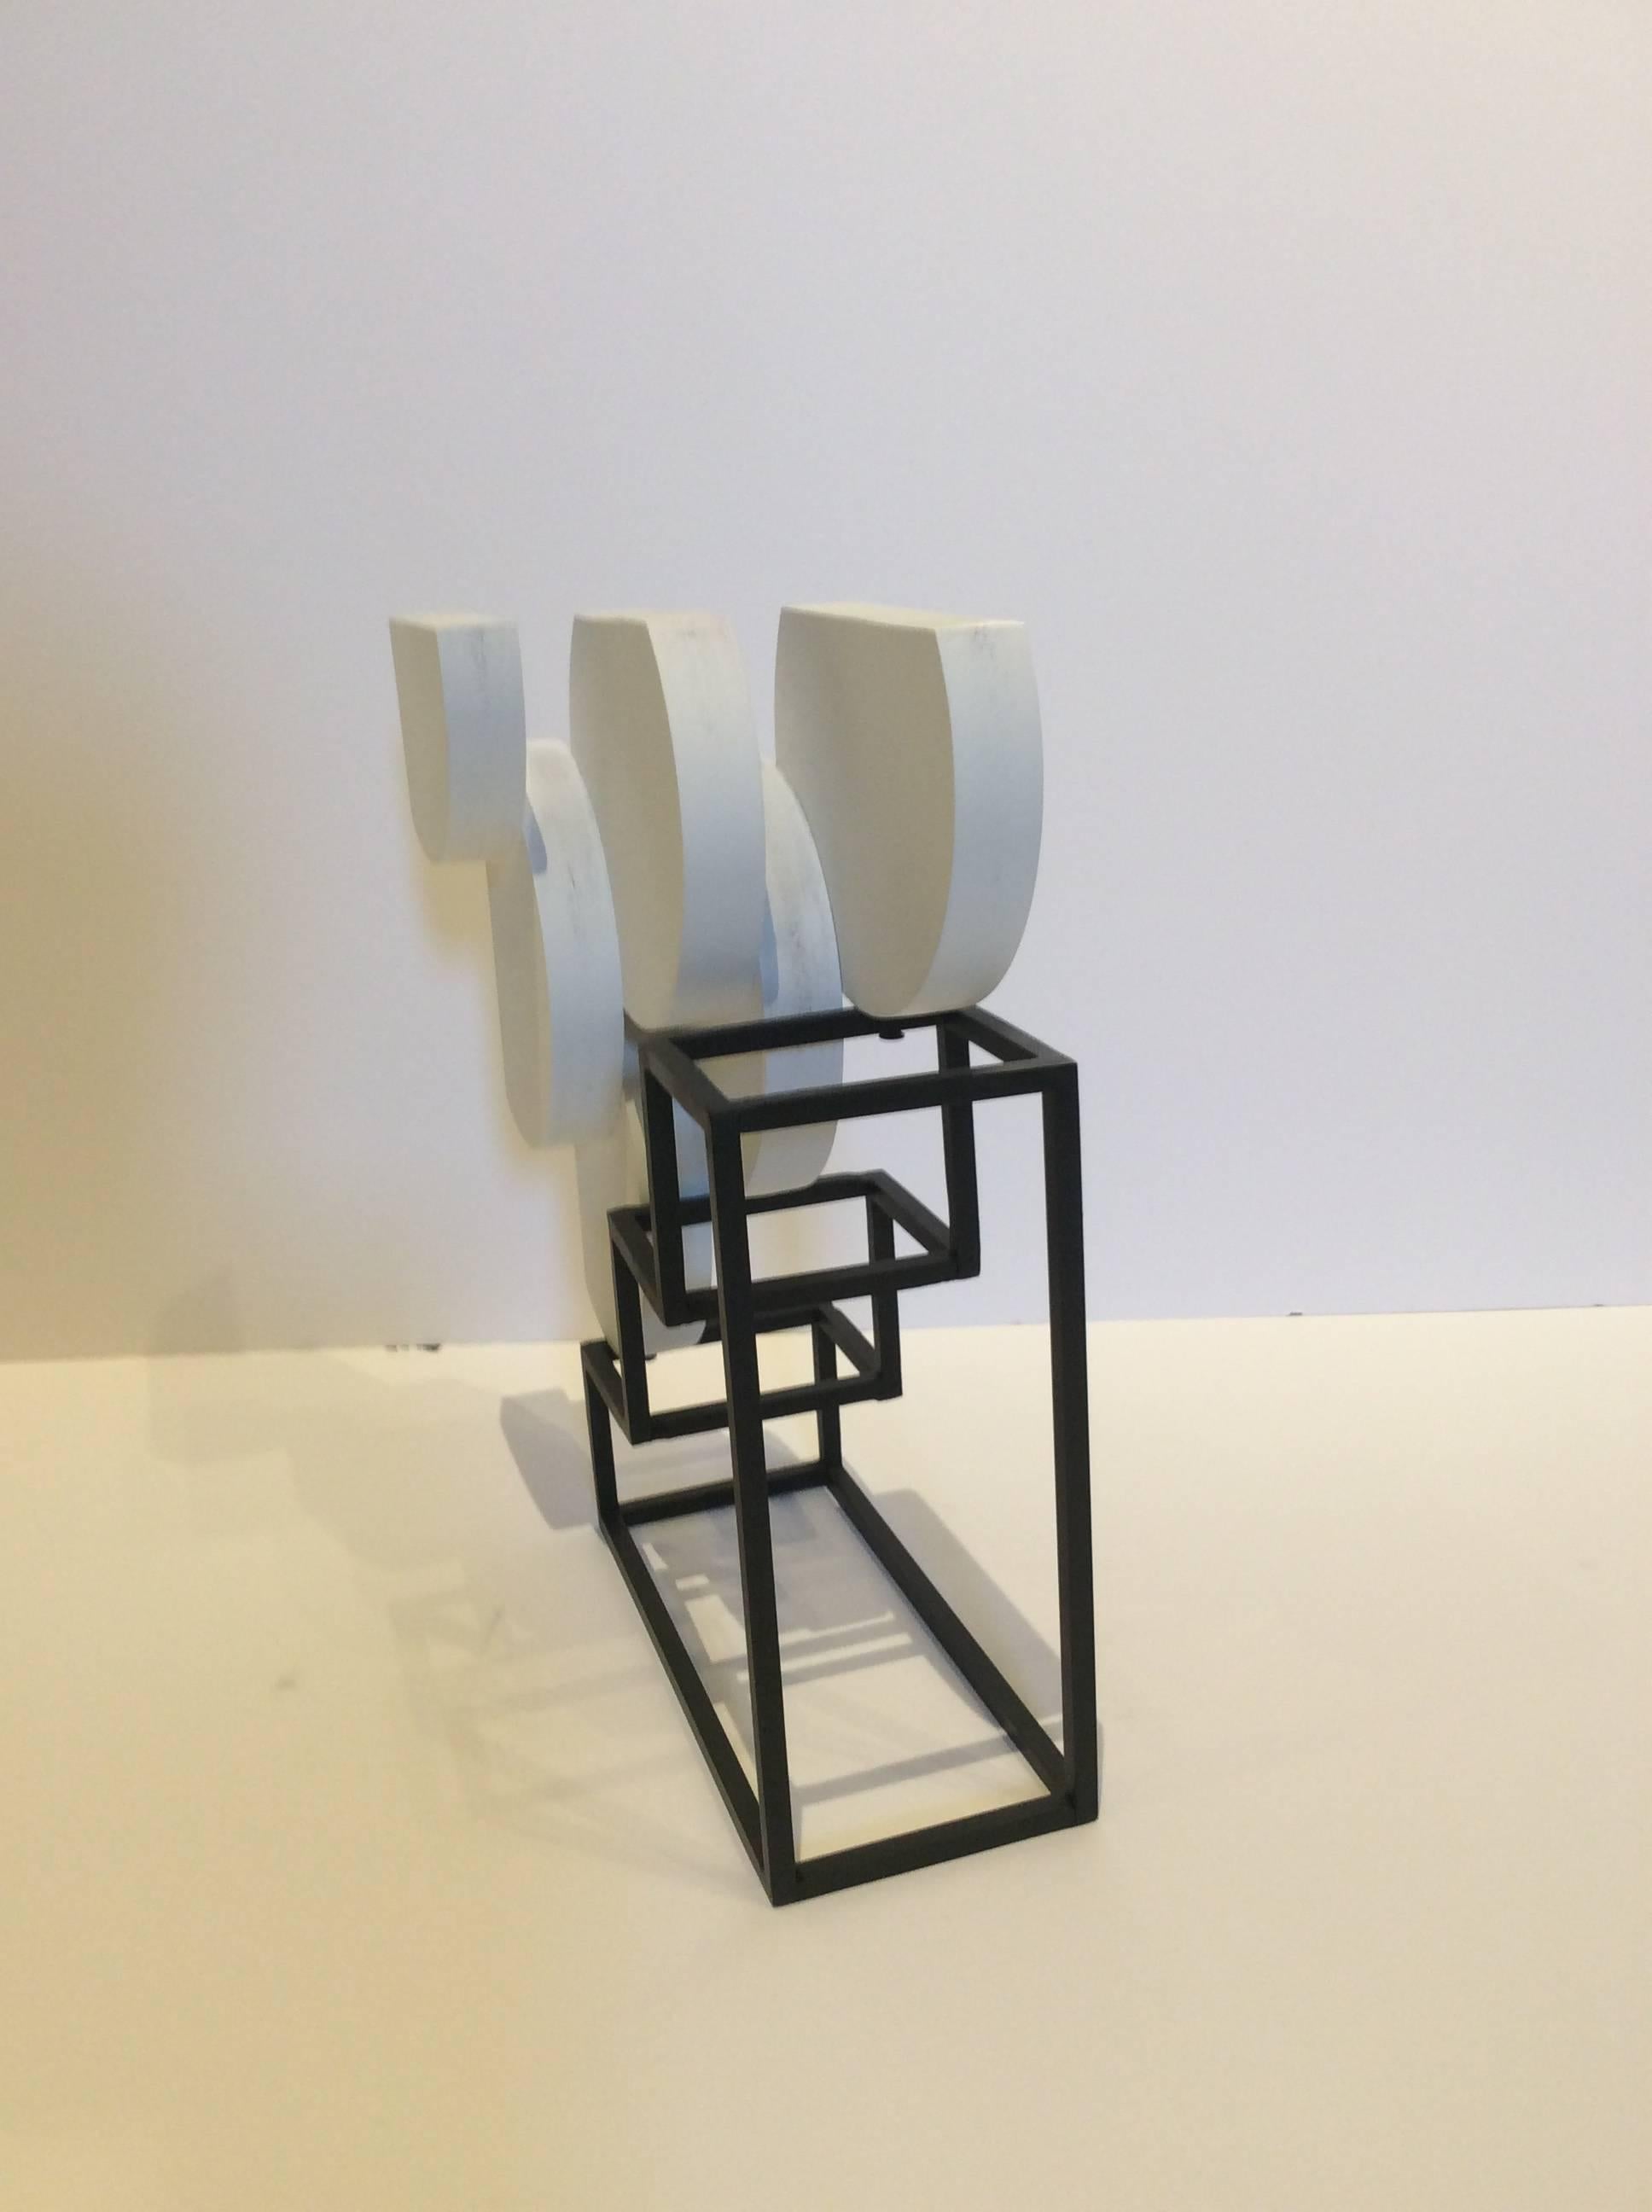 White abstract sculpture in mid century modern style
15 x 10 x 5 inches
white painted wood and black steel 

This small, contemporary abstract sculpture made of brightly painted white wood and black painted steel is perfectly suited for a tabletop,